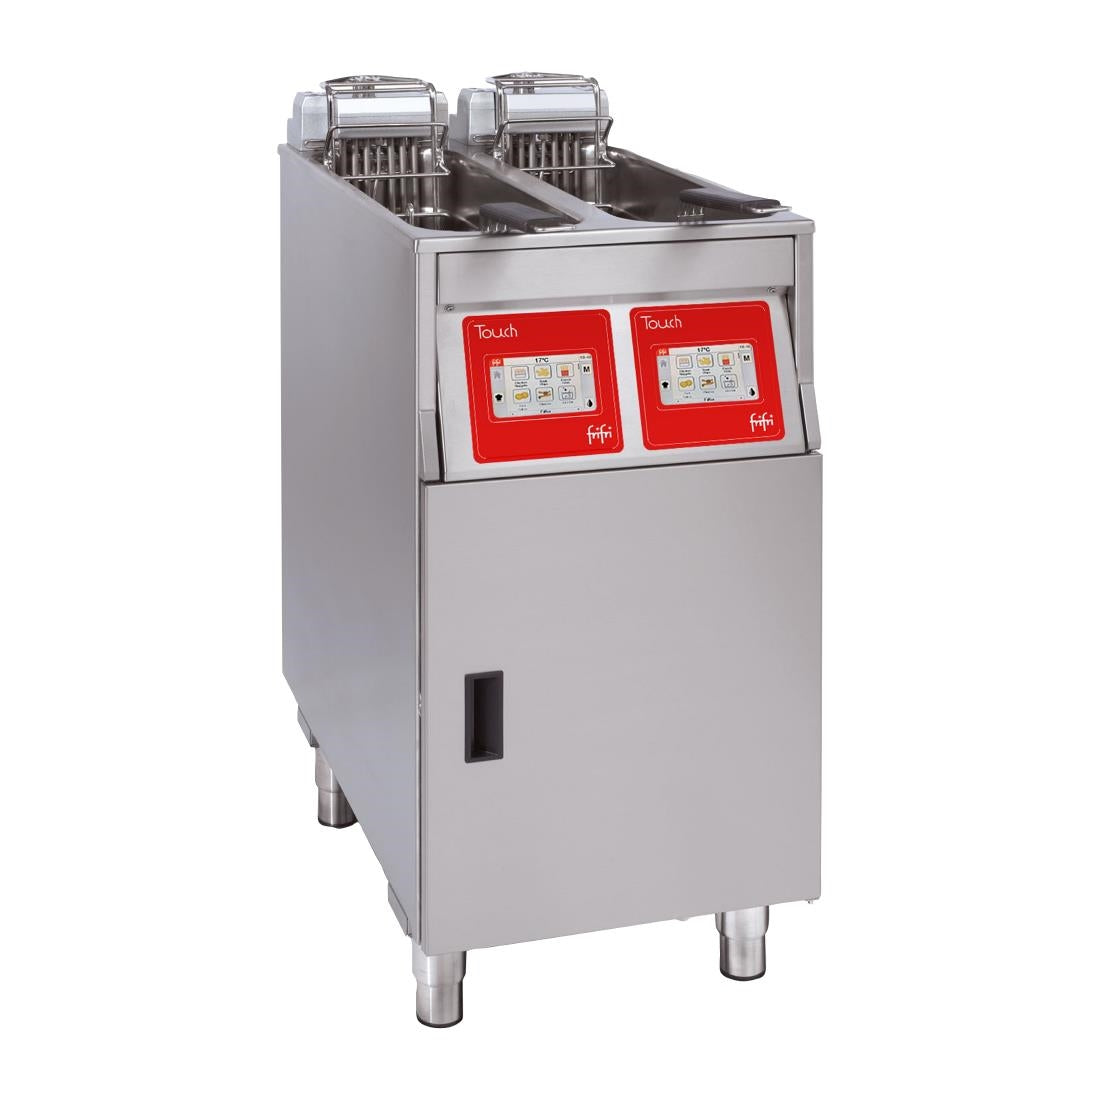 CX897 FriFri Touch 422 Electric Free Standing Twin Tank Filtration Fryer TL422M32G0 JD Catering Equipment Solutions Ltd